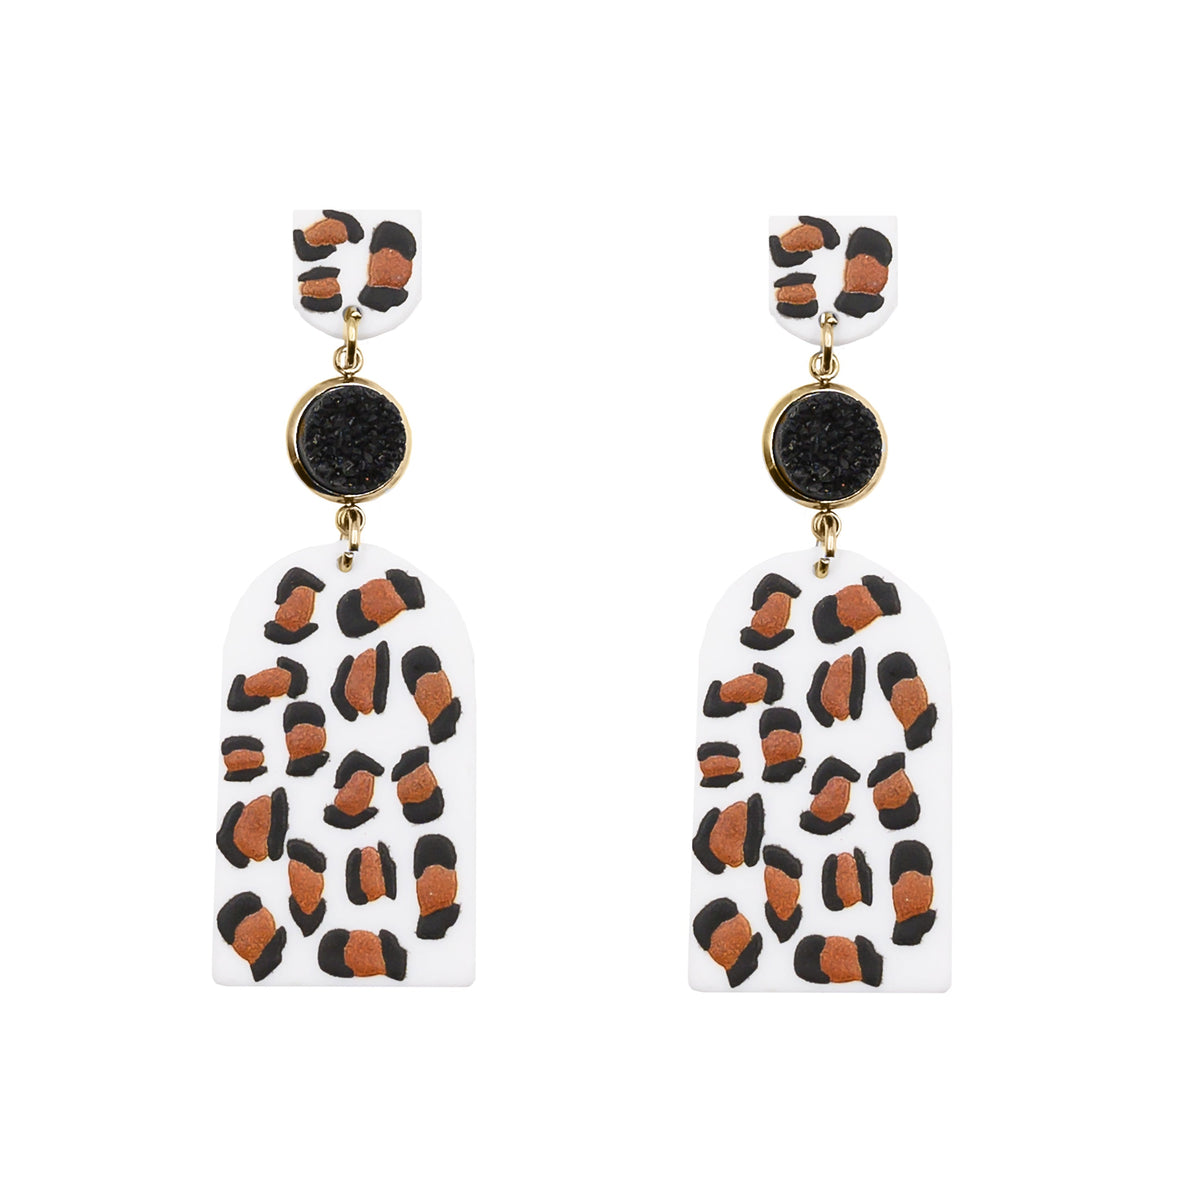 Craze Collection - Kamilah Earrings fine designer jewelry for men and women